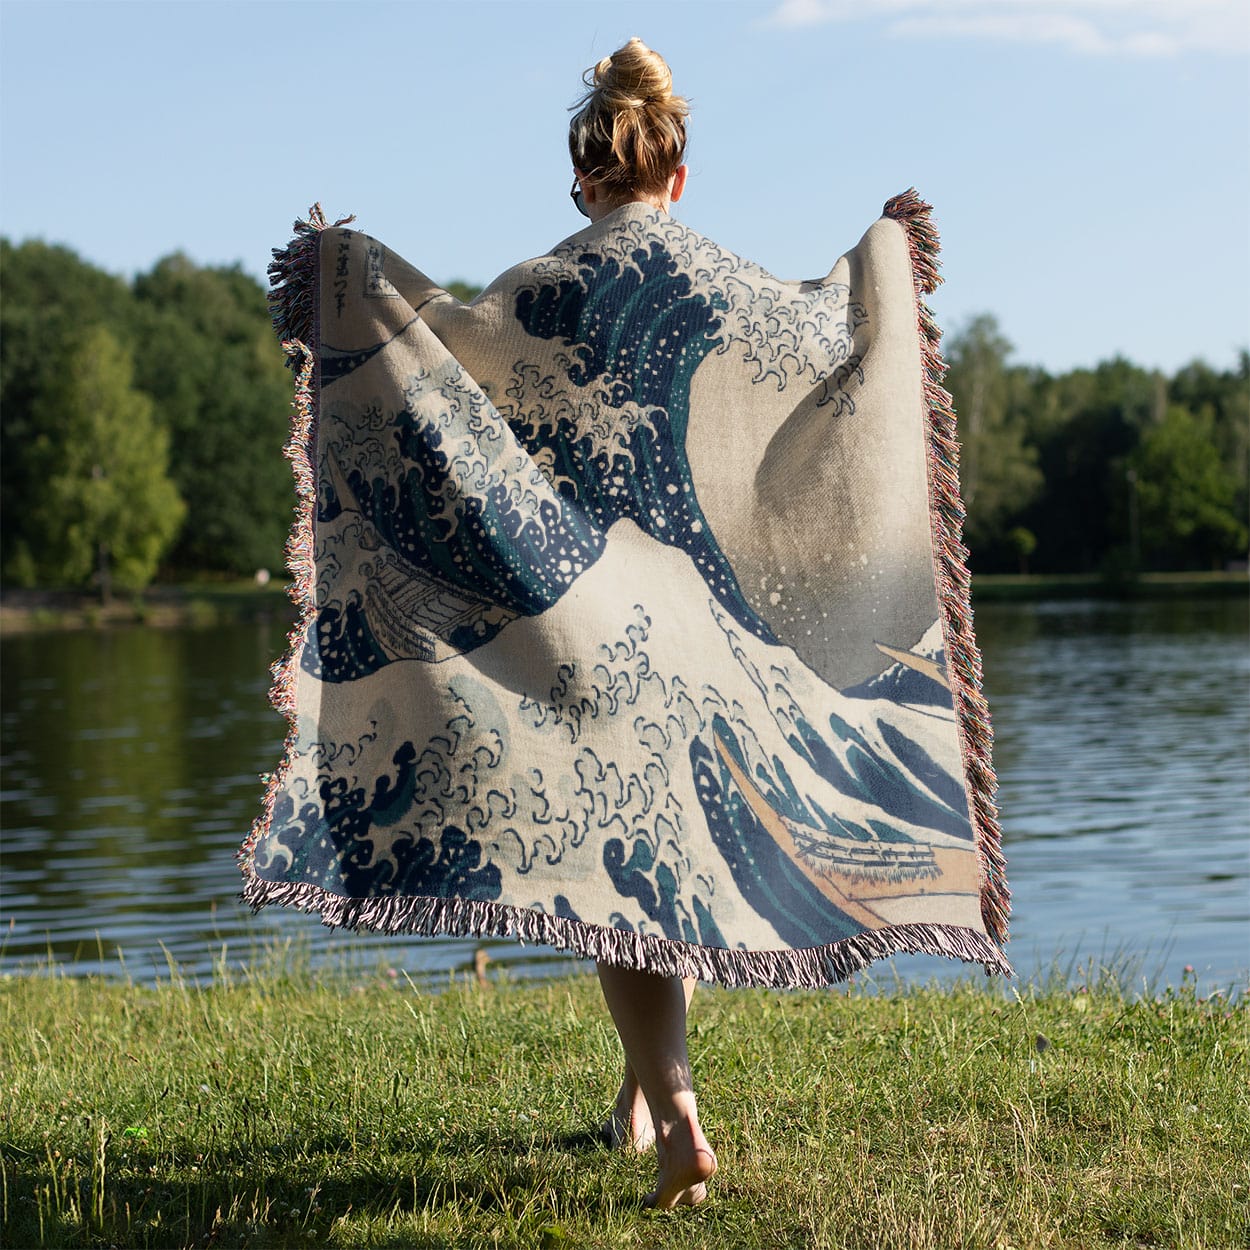 Big Wave Woven Blanket Held on a Woman's Back Outside